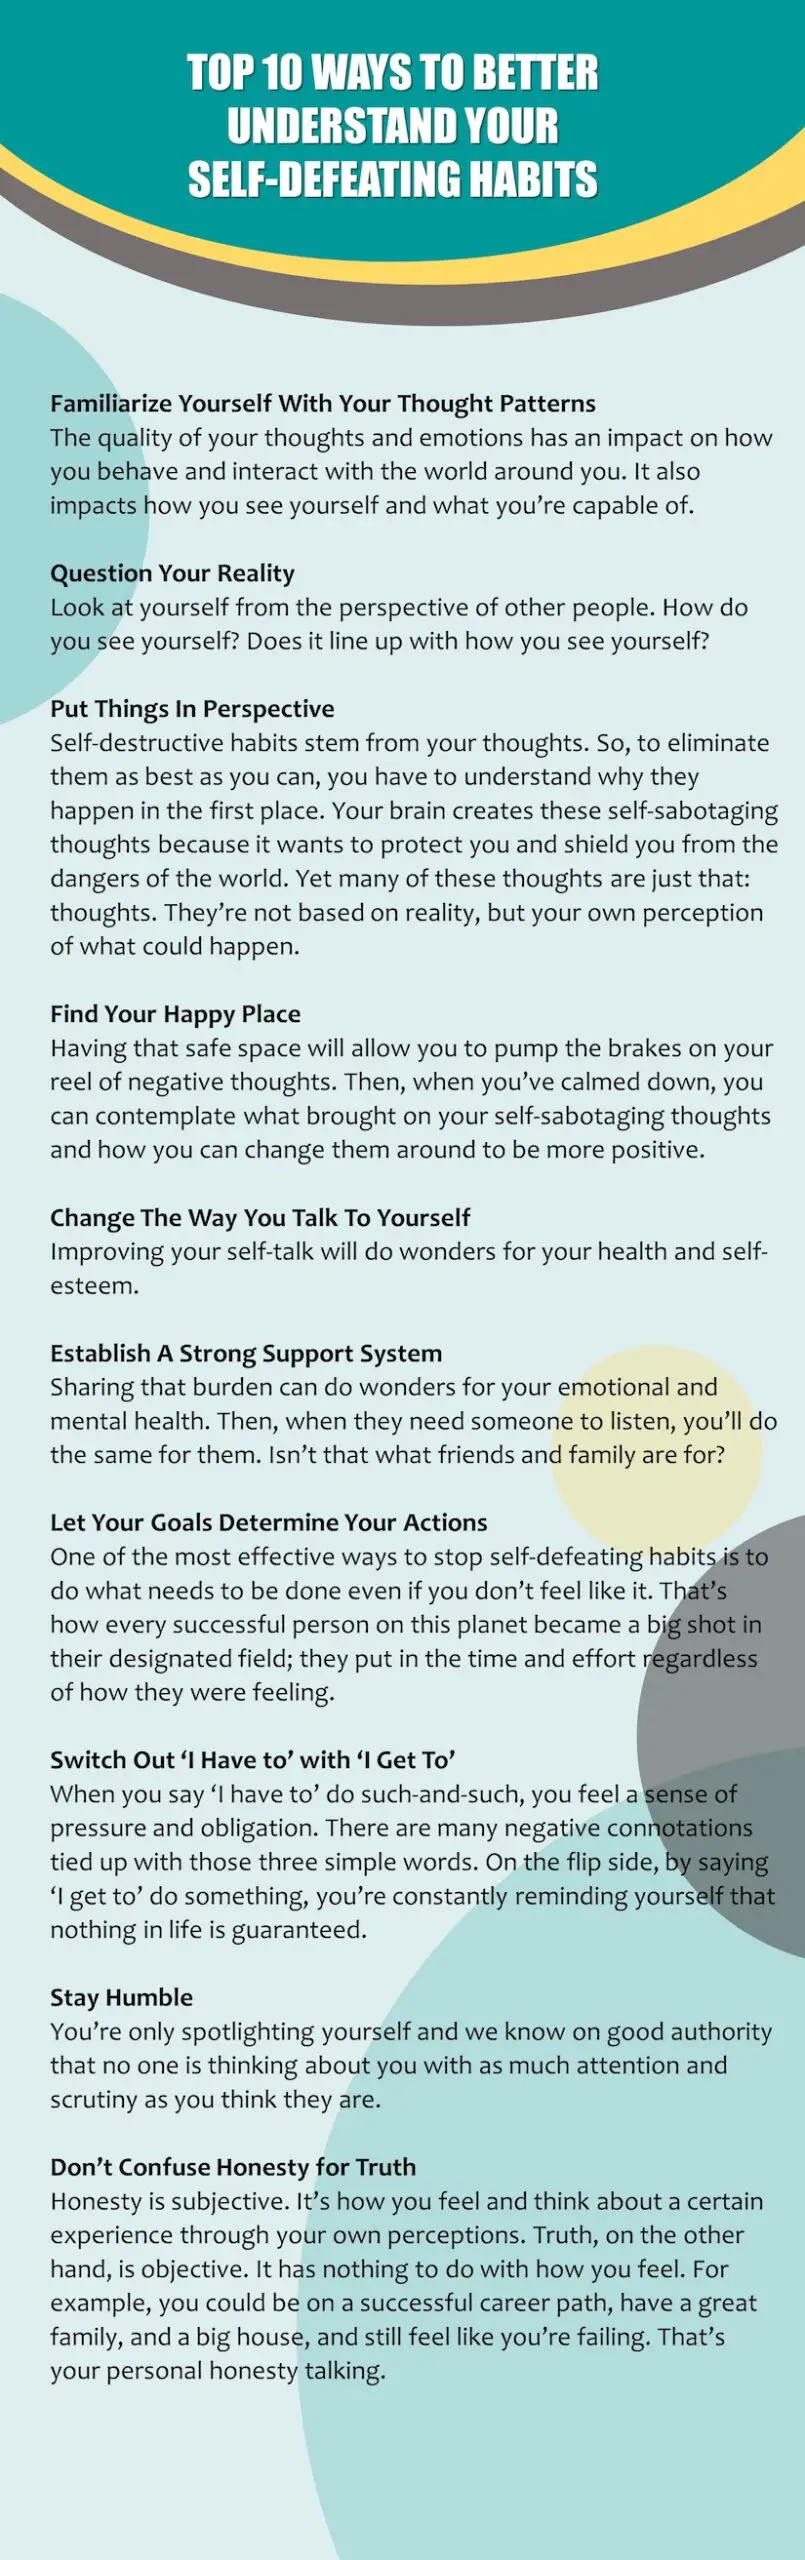 10 Ways to better understand your self defeating habits.